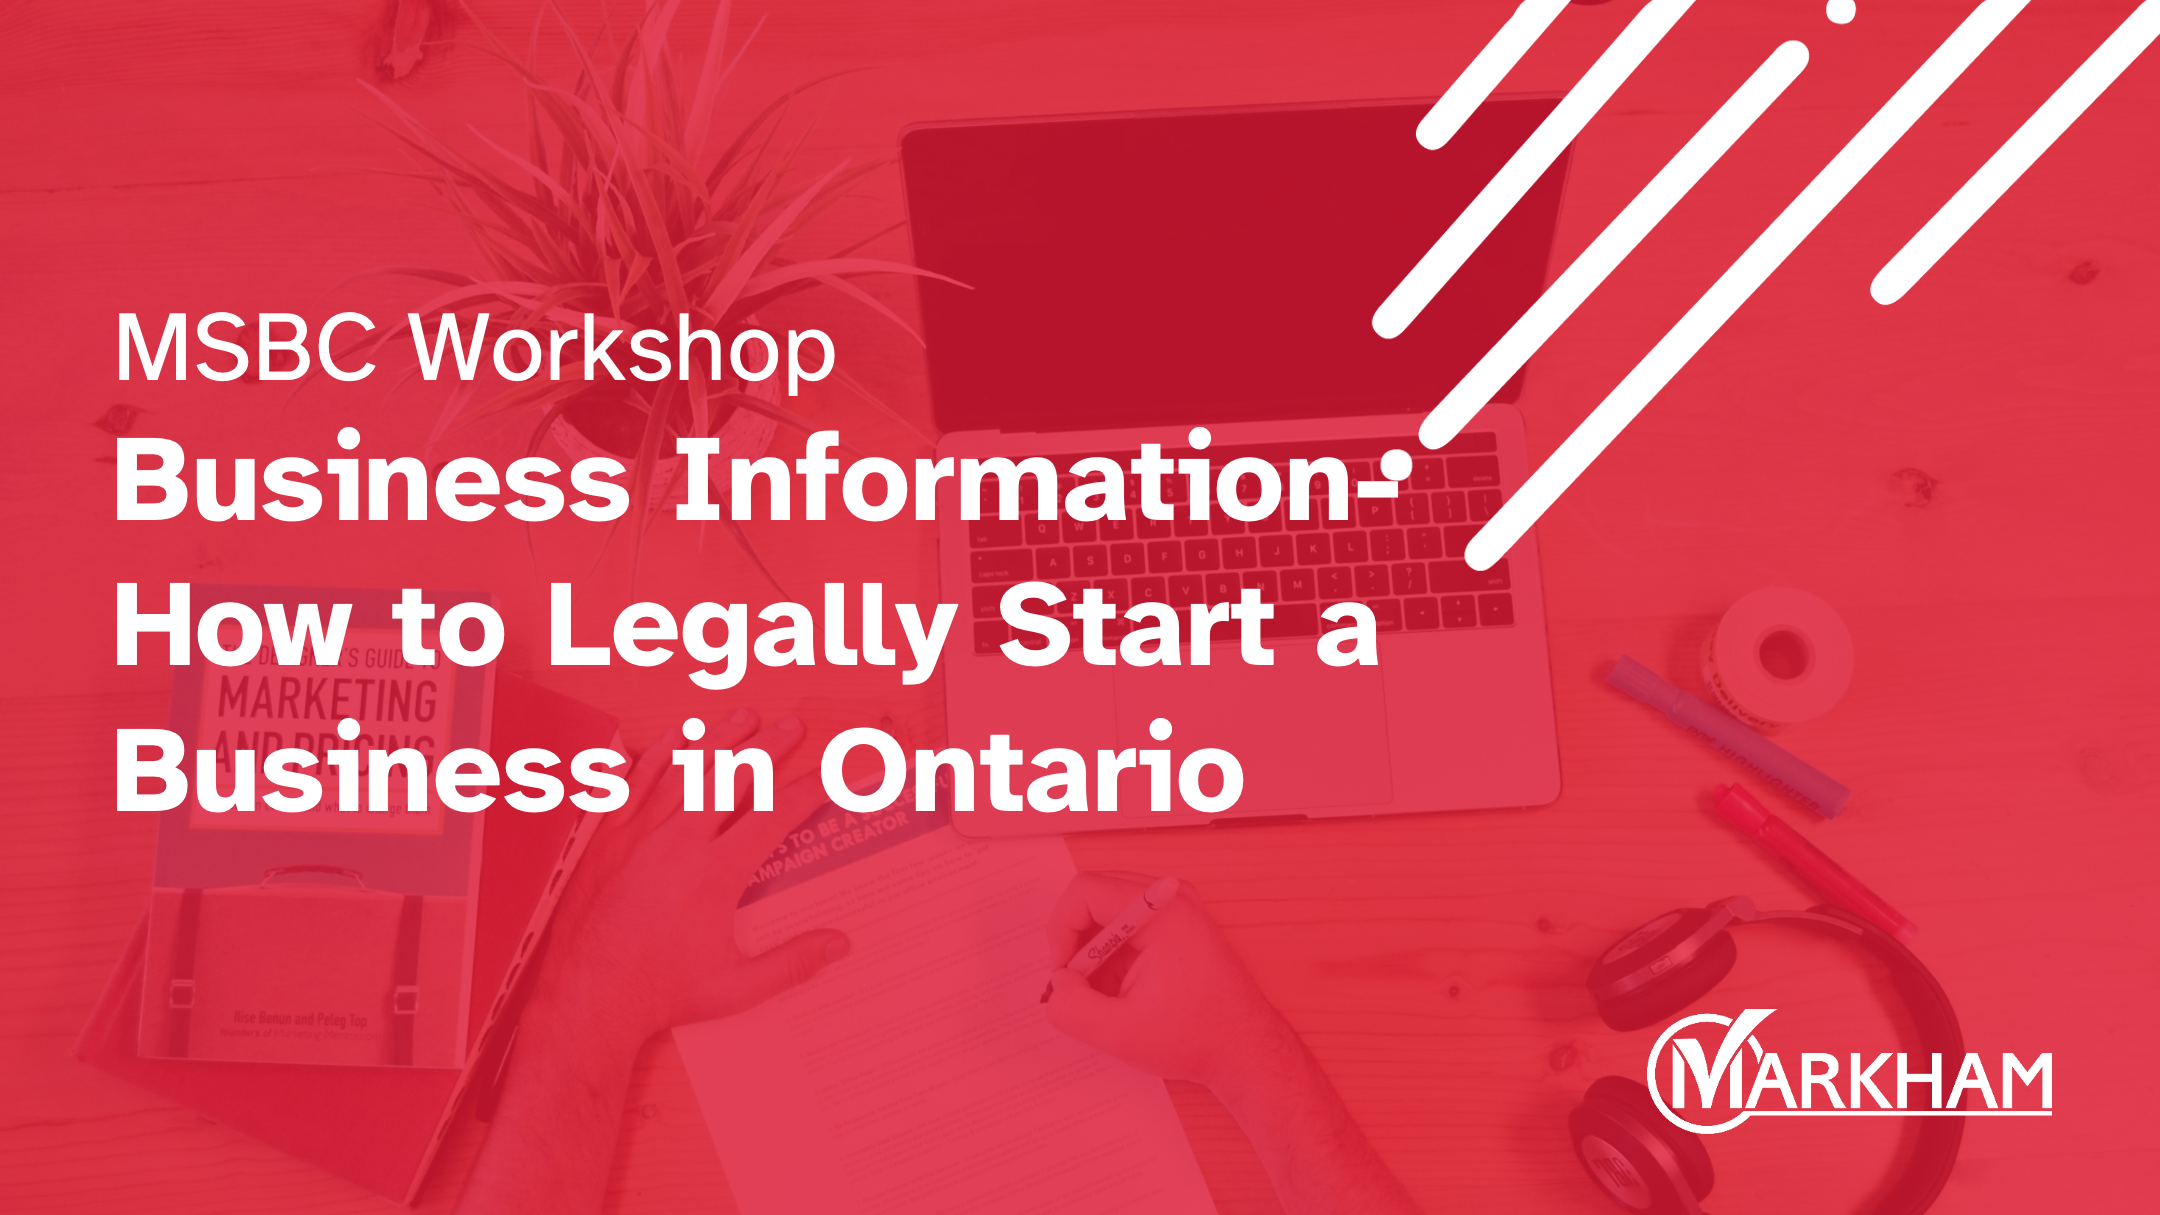 Business Information - How to Legally Start a Business in Ontario